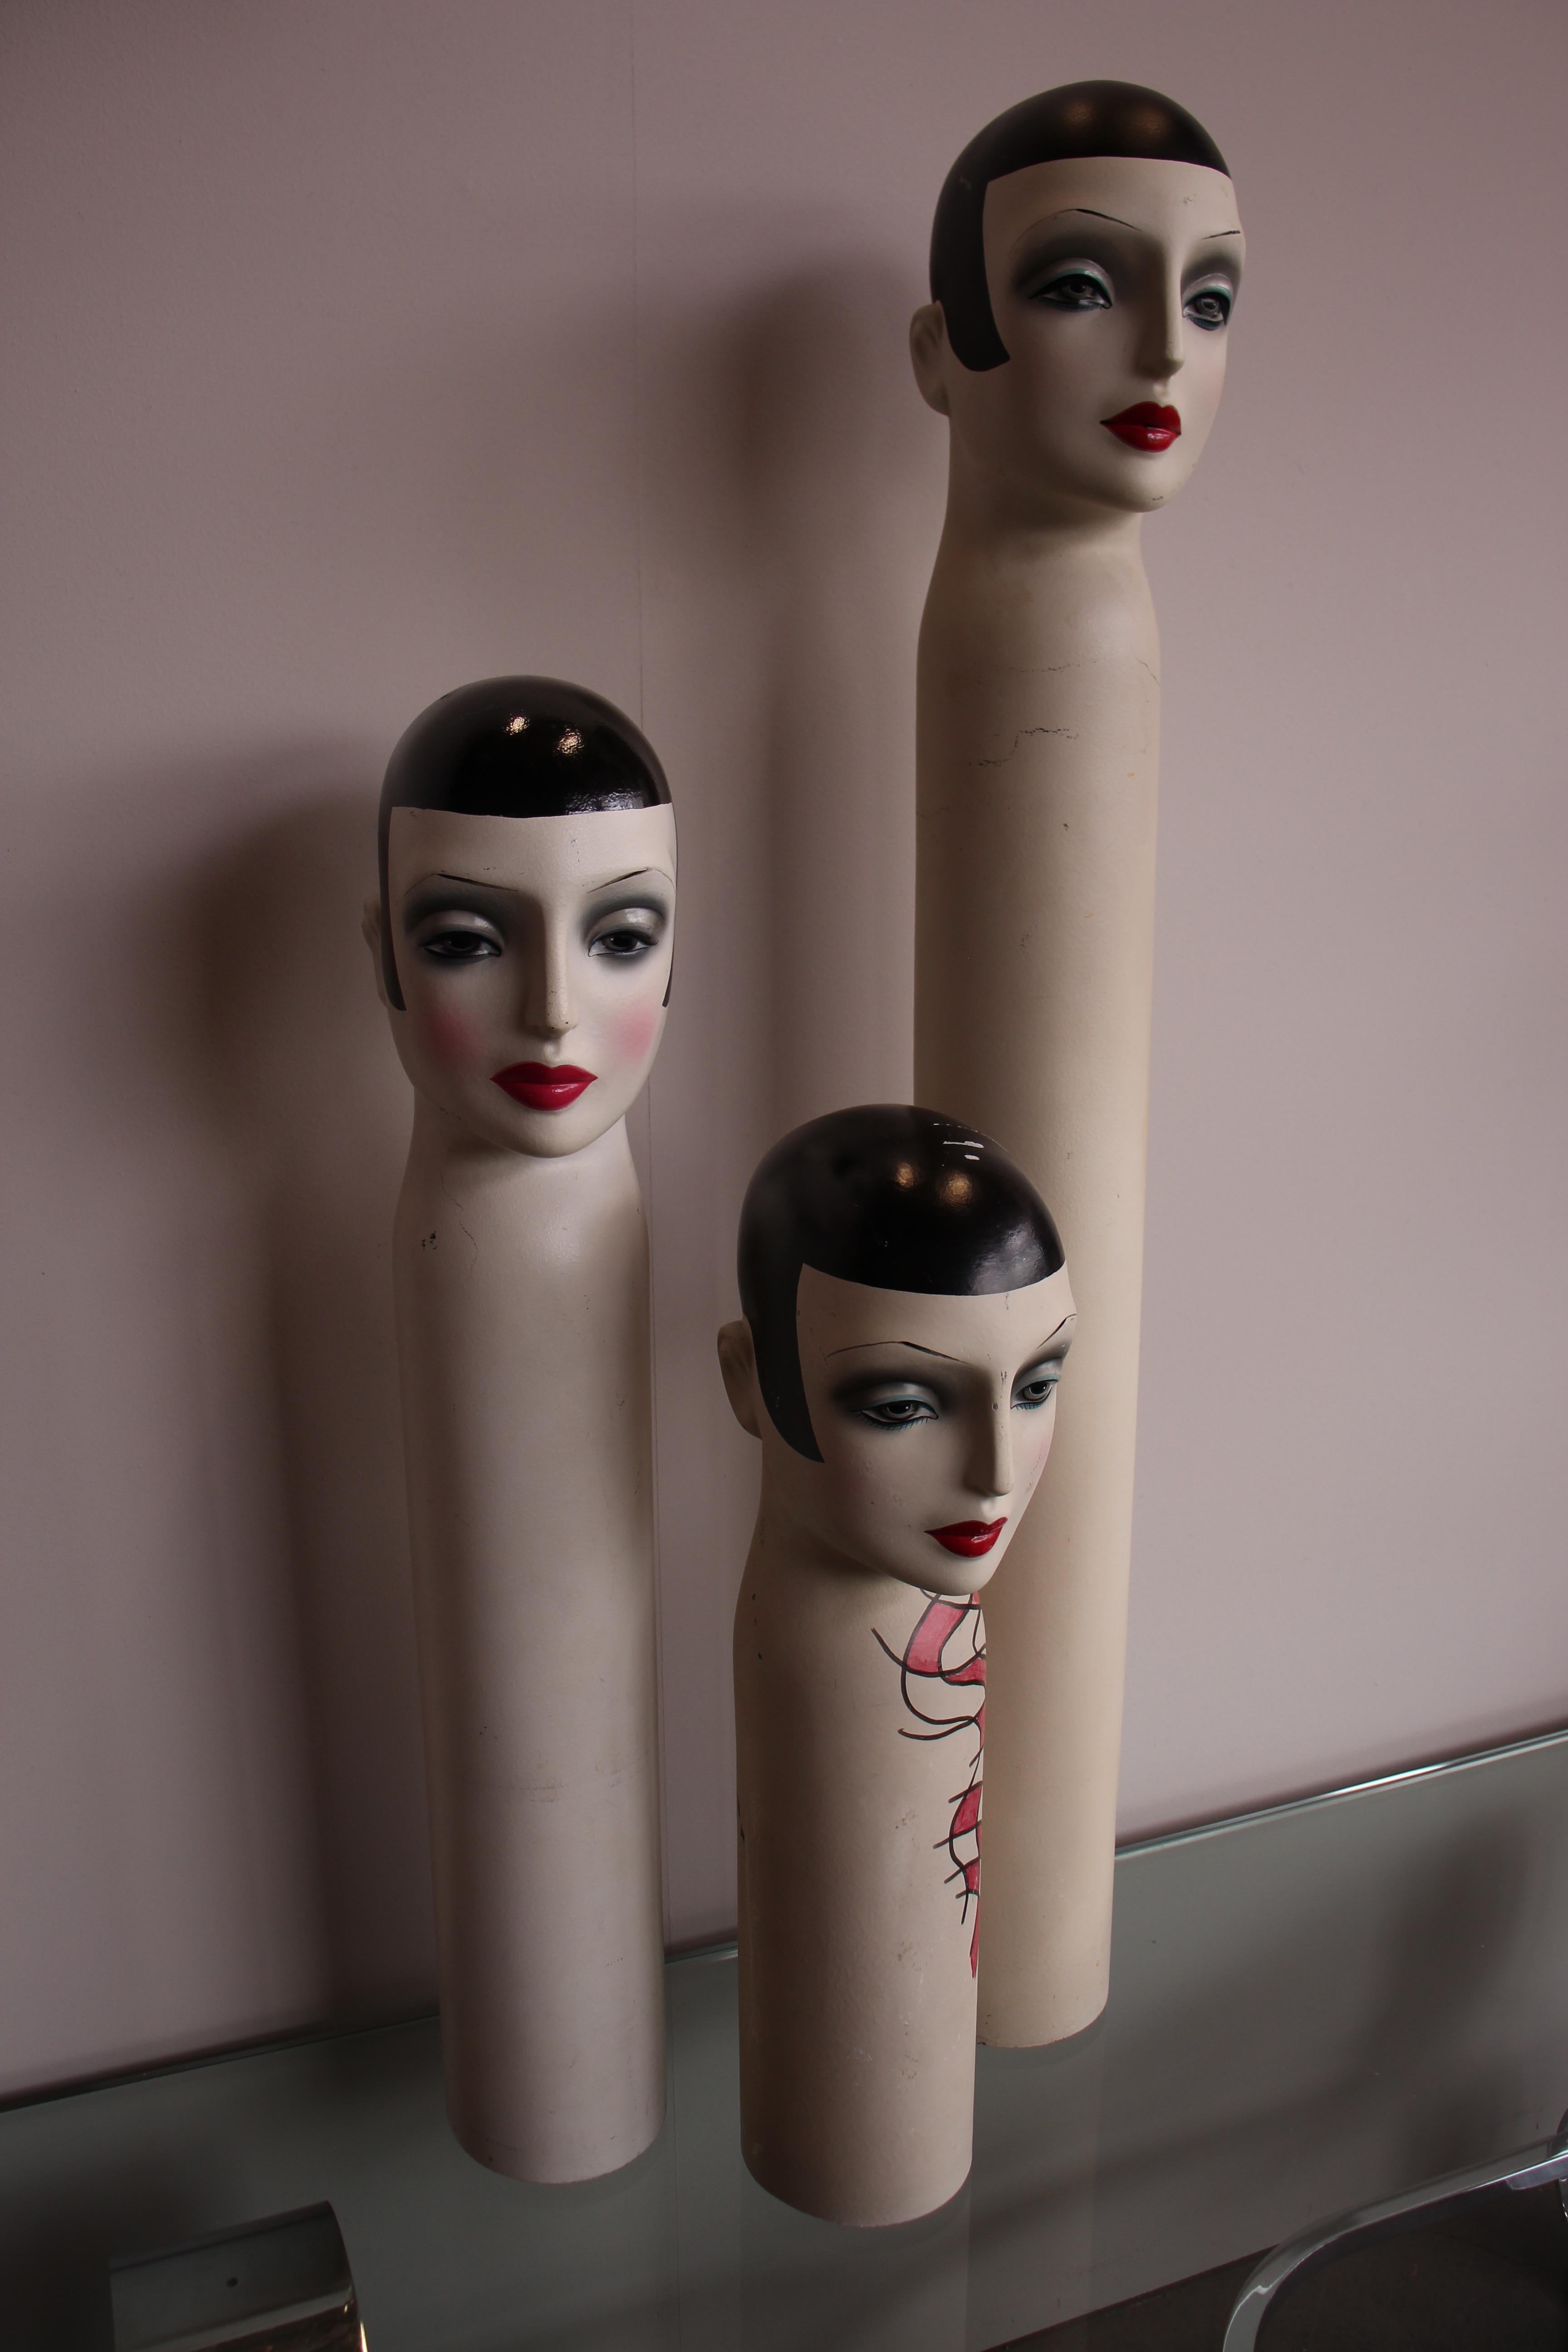 Mannequins for hats and scarves from the 1950s. The figures were family owned and were repainted in the 1980s. The dolls are reminiscent of the women paintings by Tamara de Lempikca and the glamorous Art Deco Look of the 1920s.
 